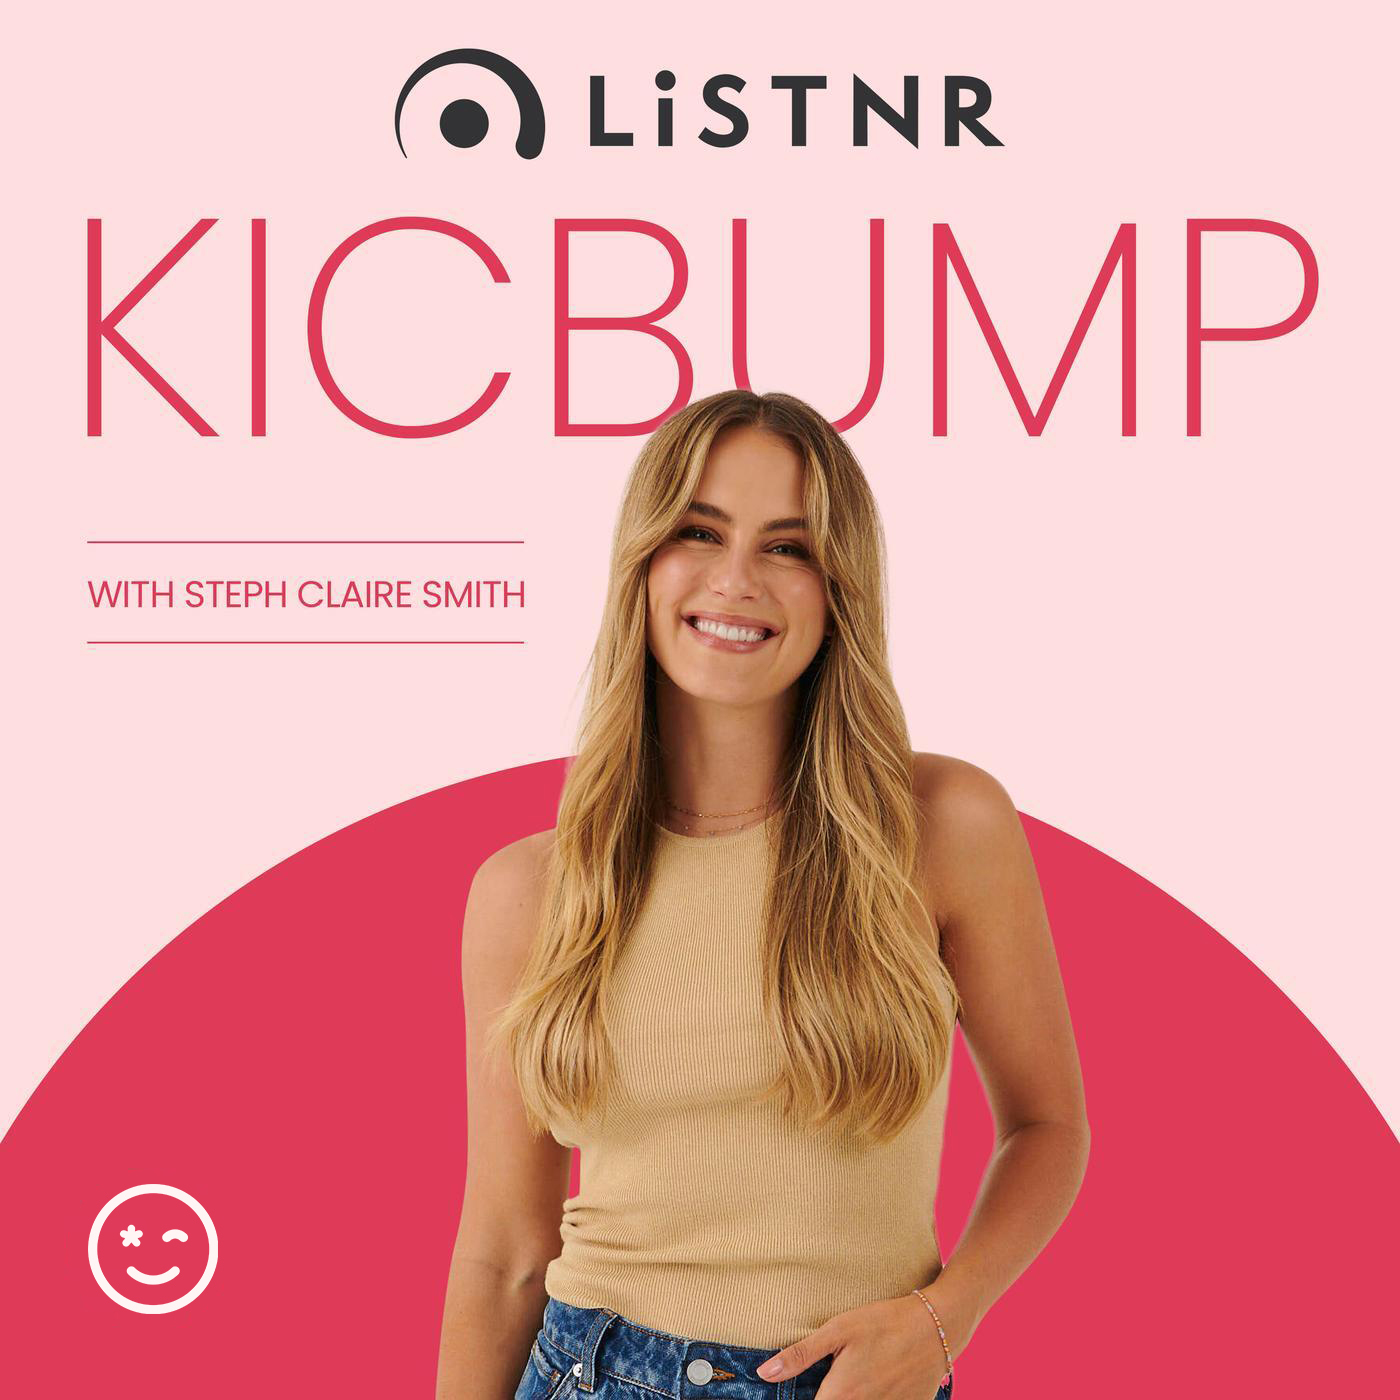 Losing a loved one & giving birth 3 weeks later - KICBUMP with Katie Lolas